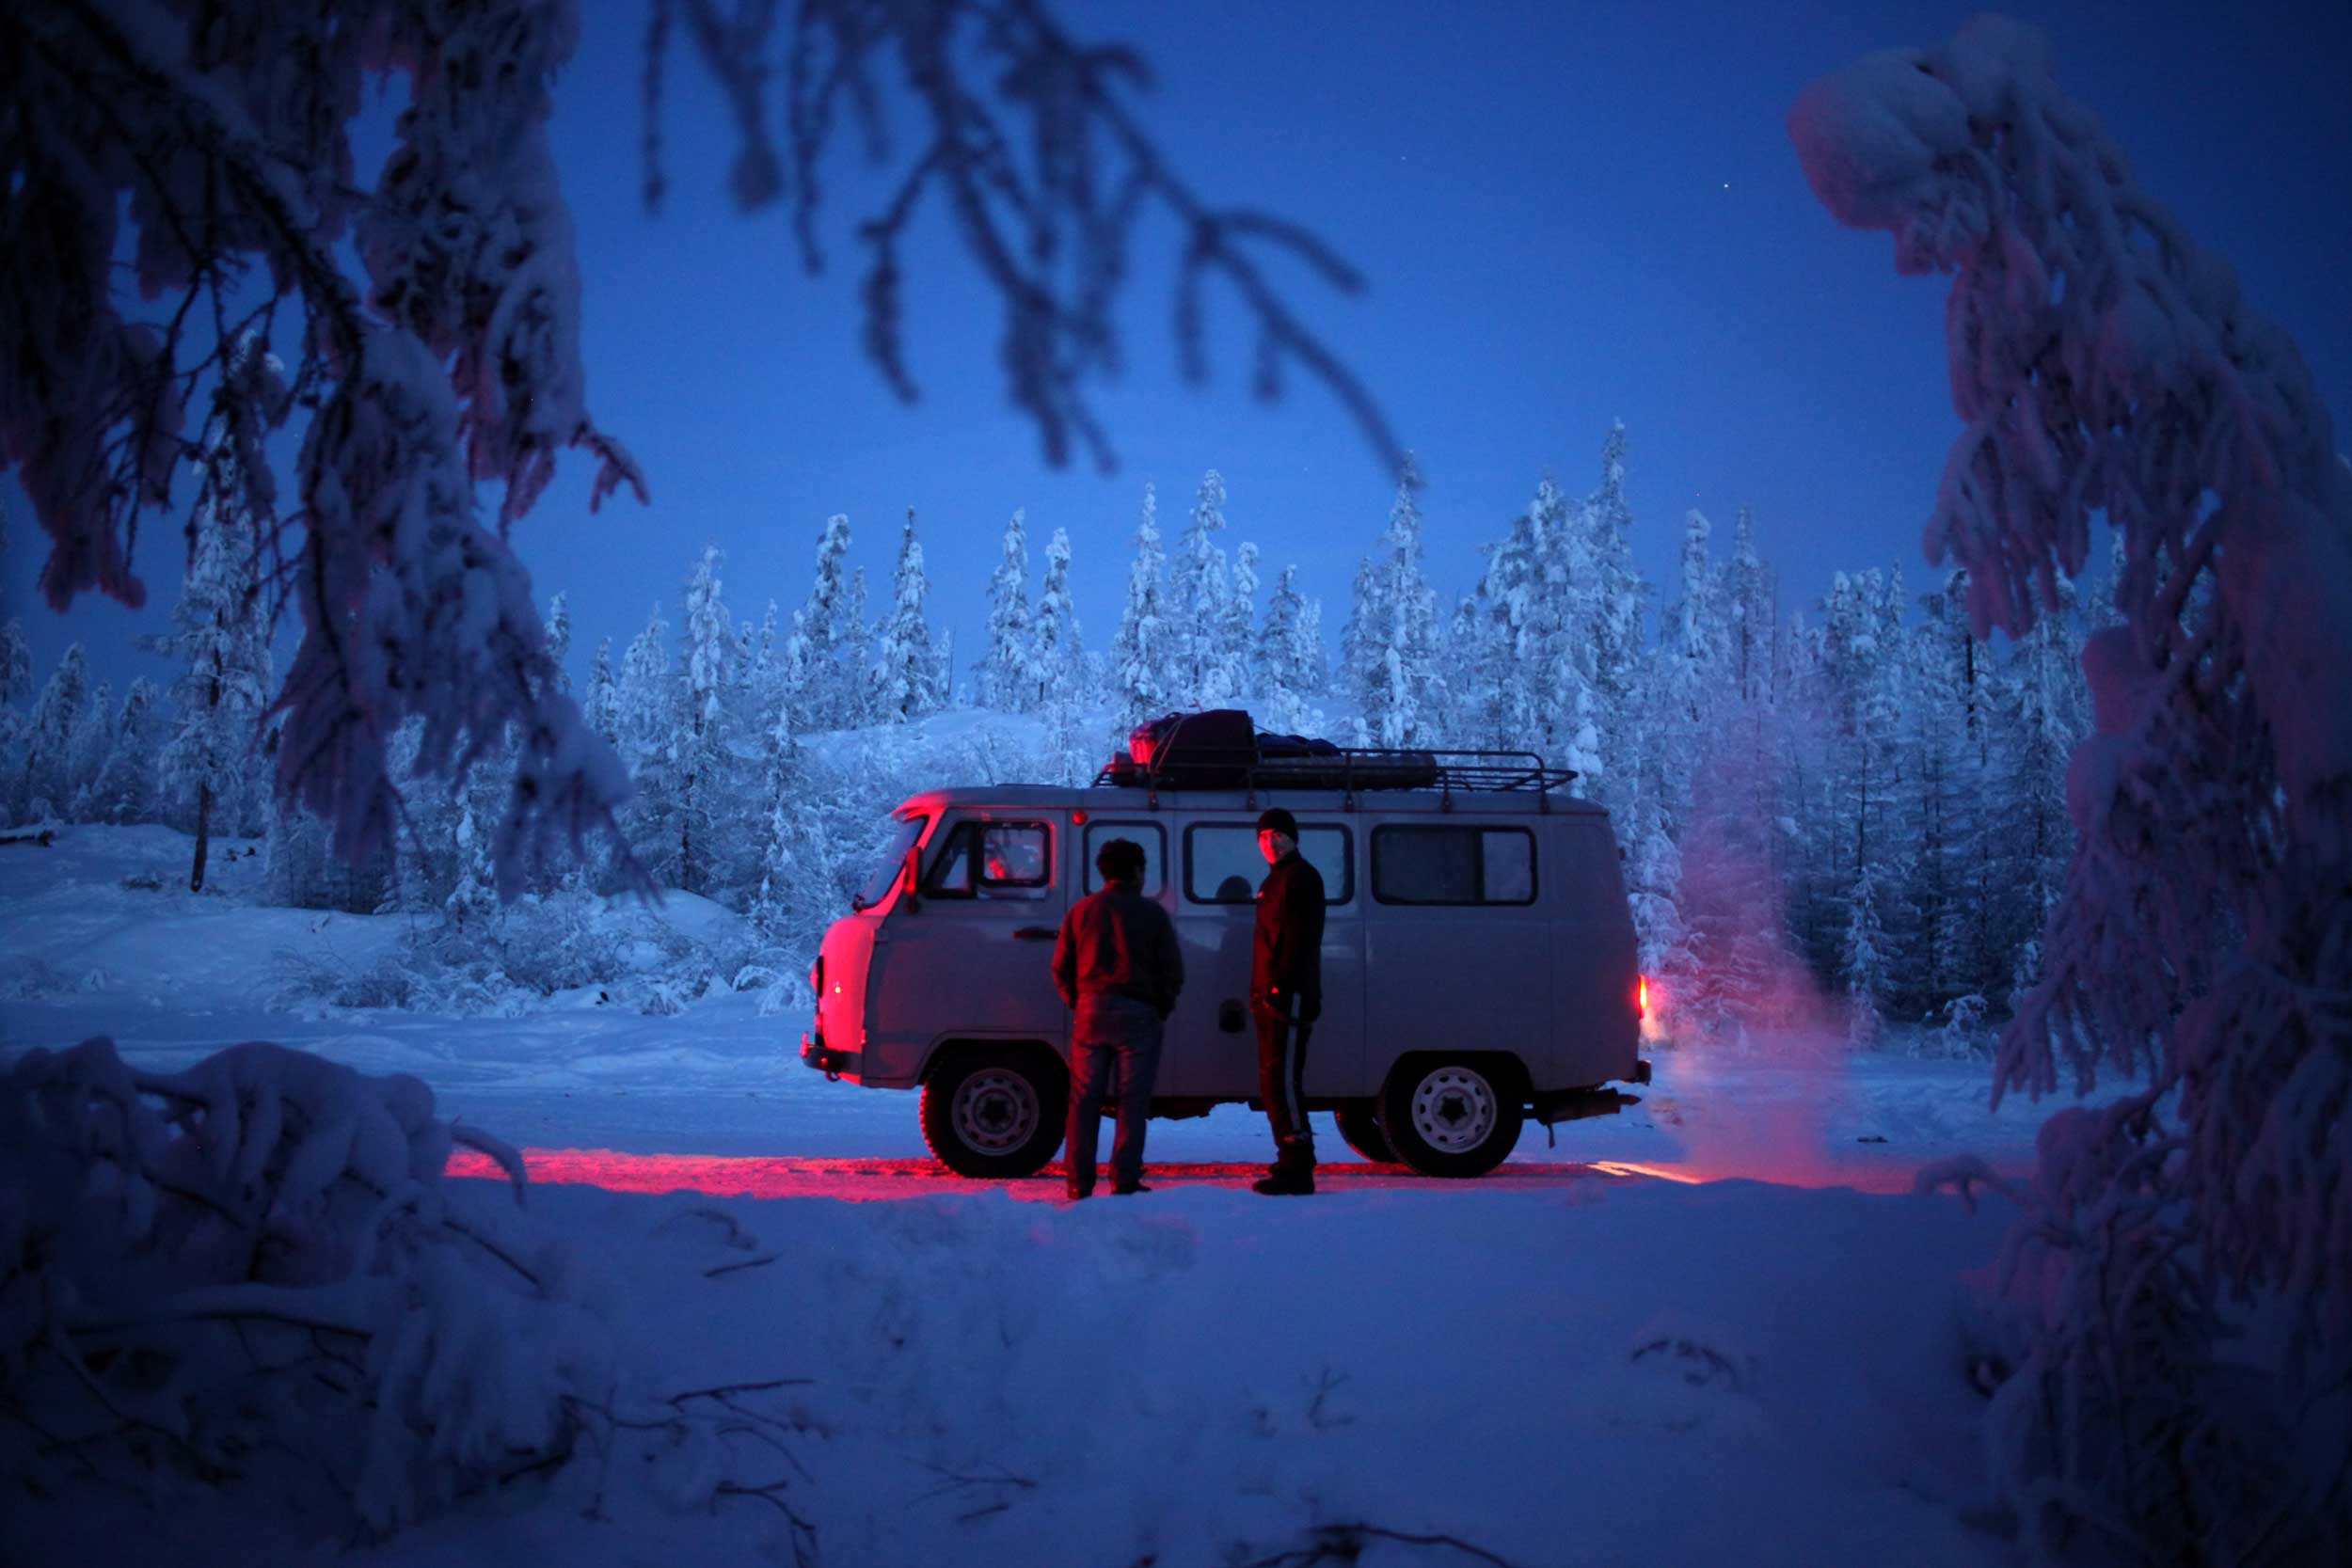 Two men by a van in a snowy forest in Oymyakon which is the coldest inhabited place